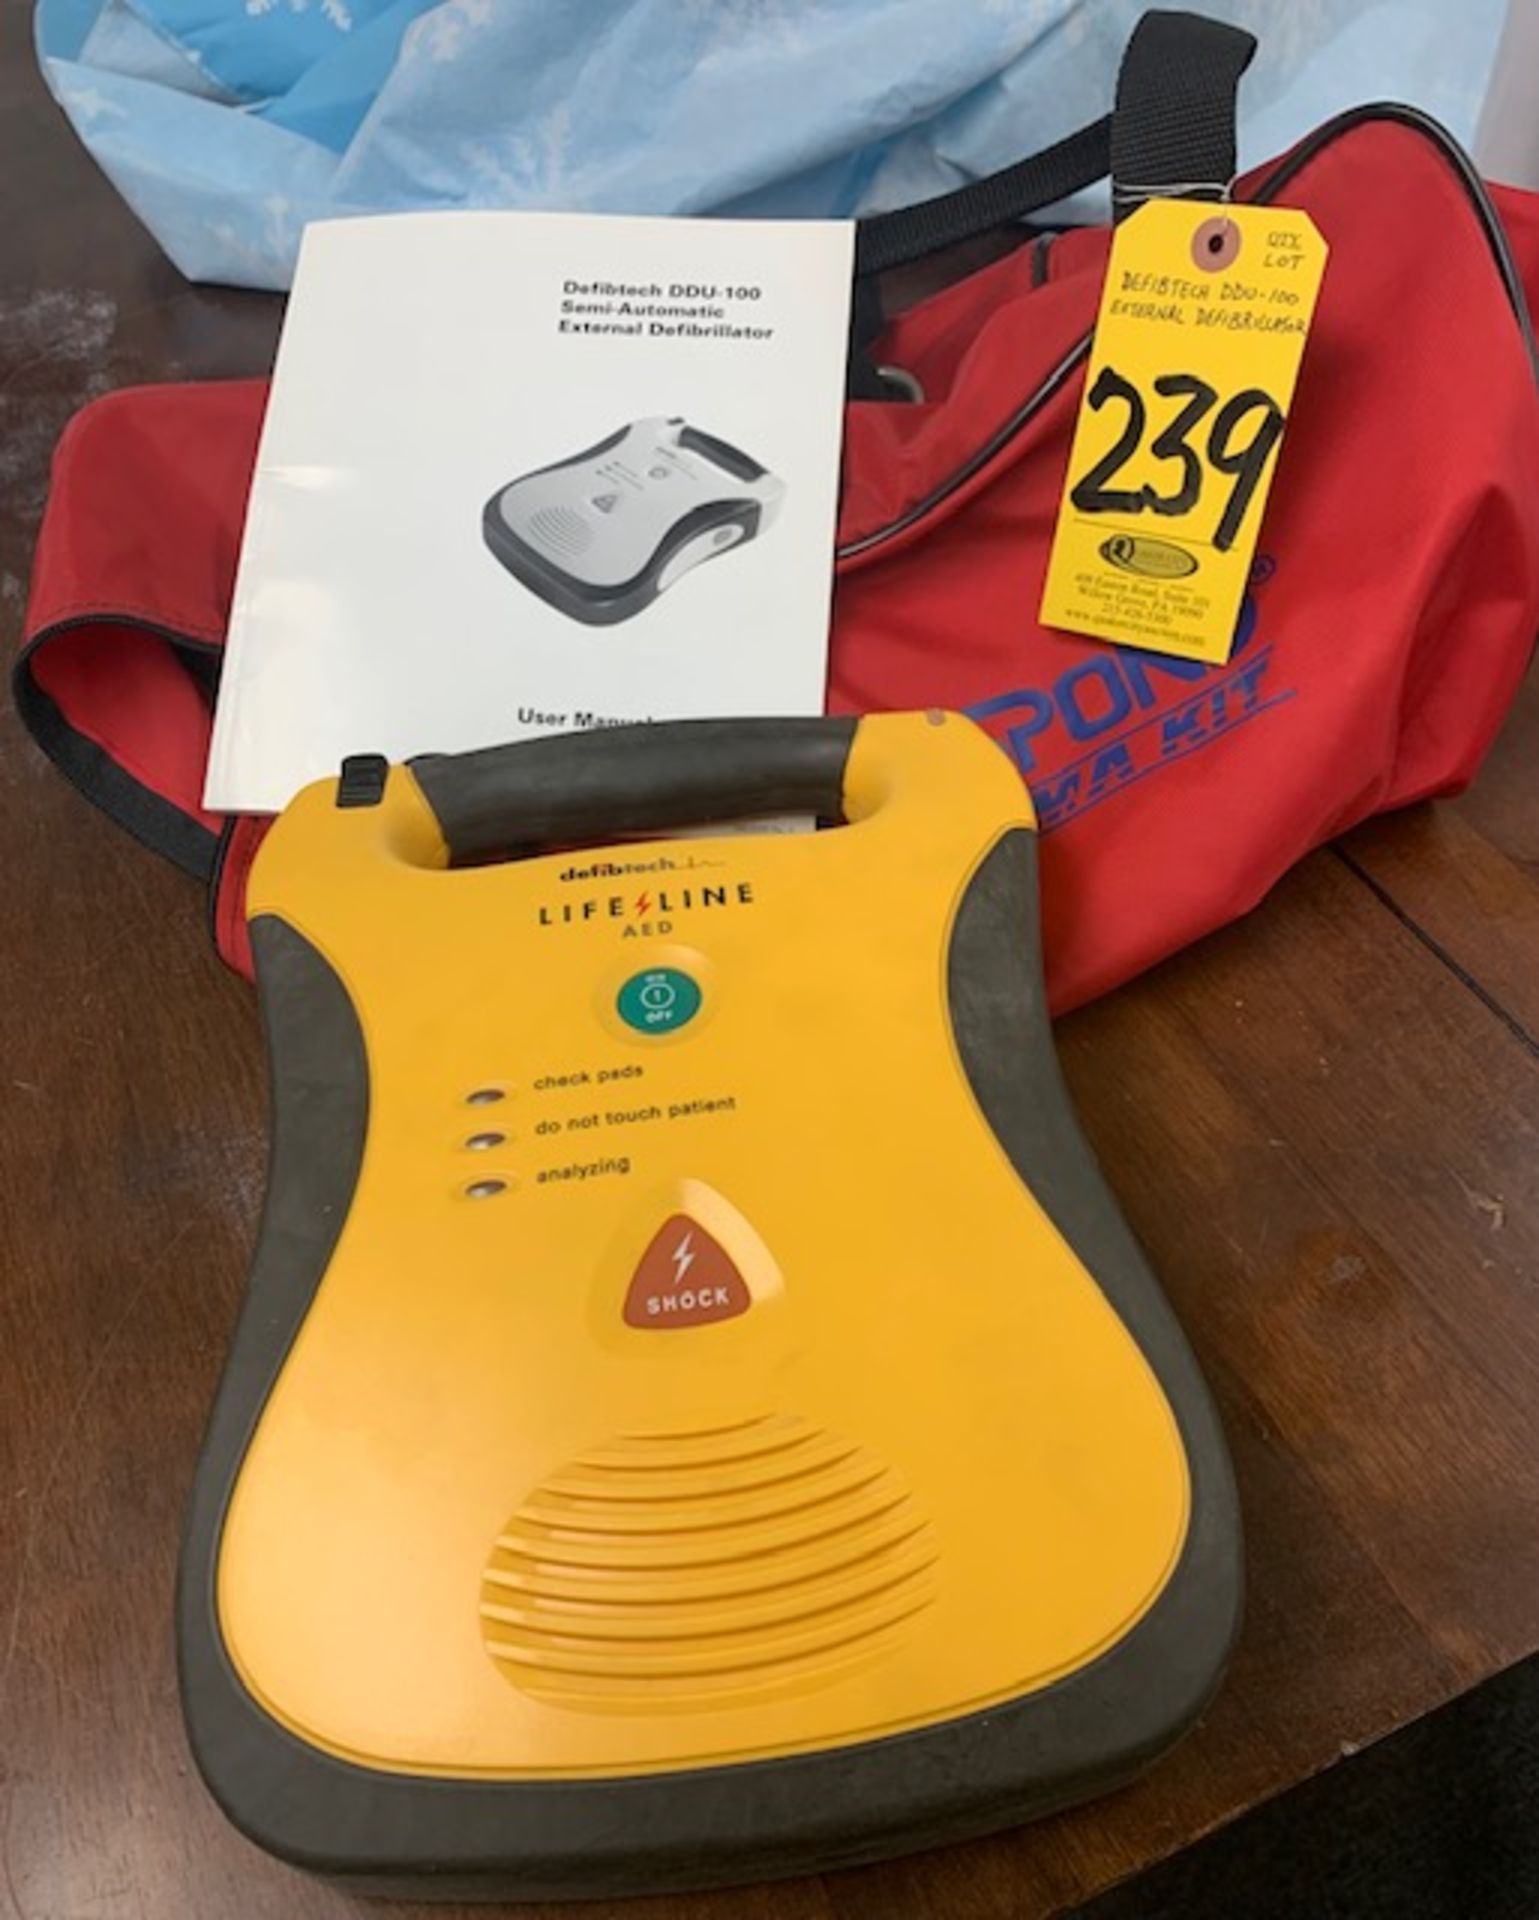 DEFIBTECH DDU-100 SEMI-AUTOMATIC EXTERNAL DEFIBRILLATOR WITH STORAGE BAG AND CPR MASK